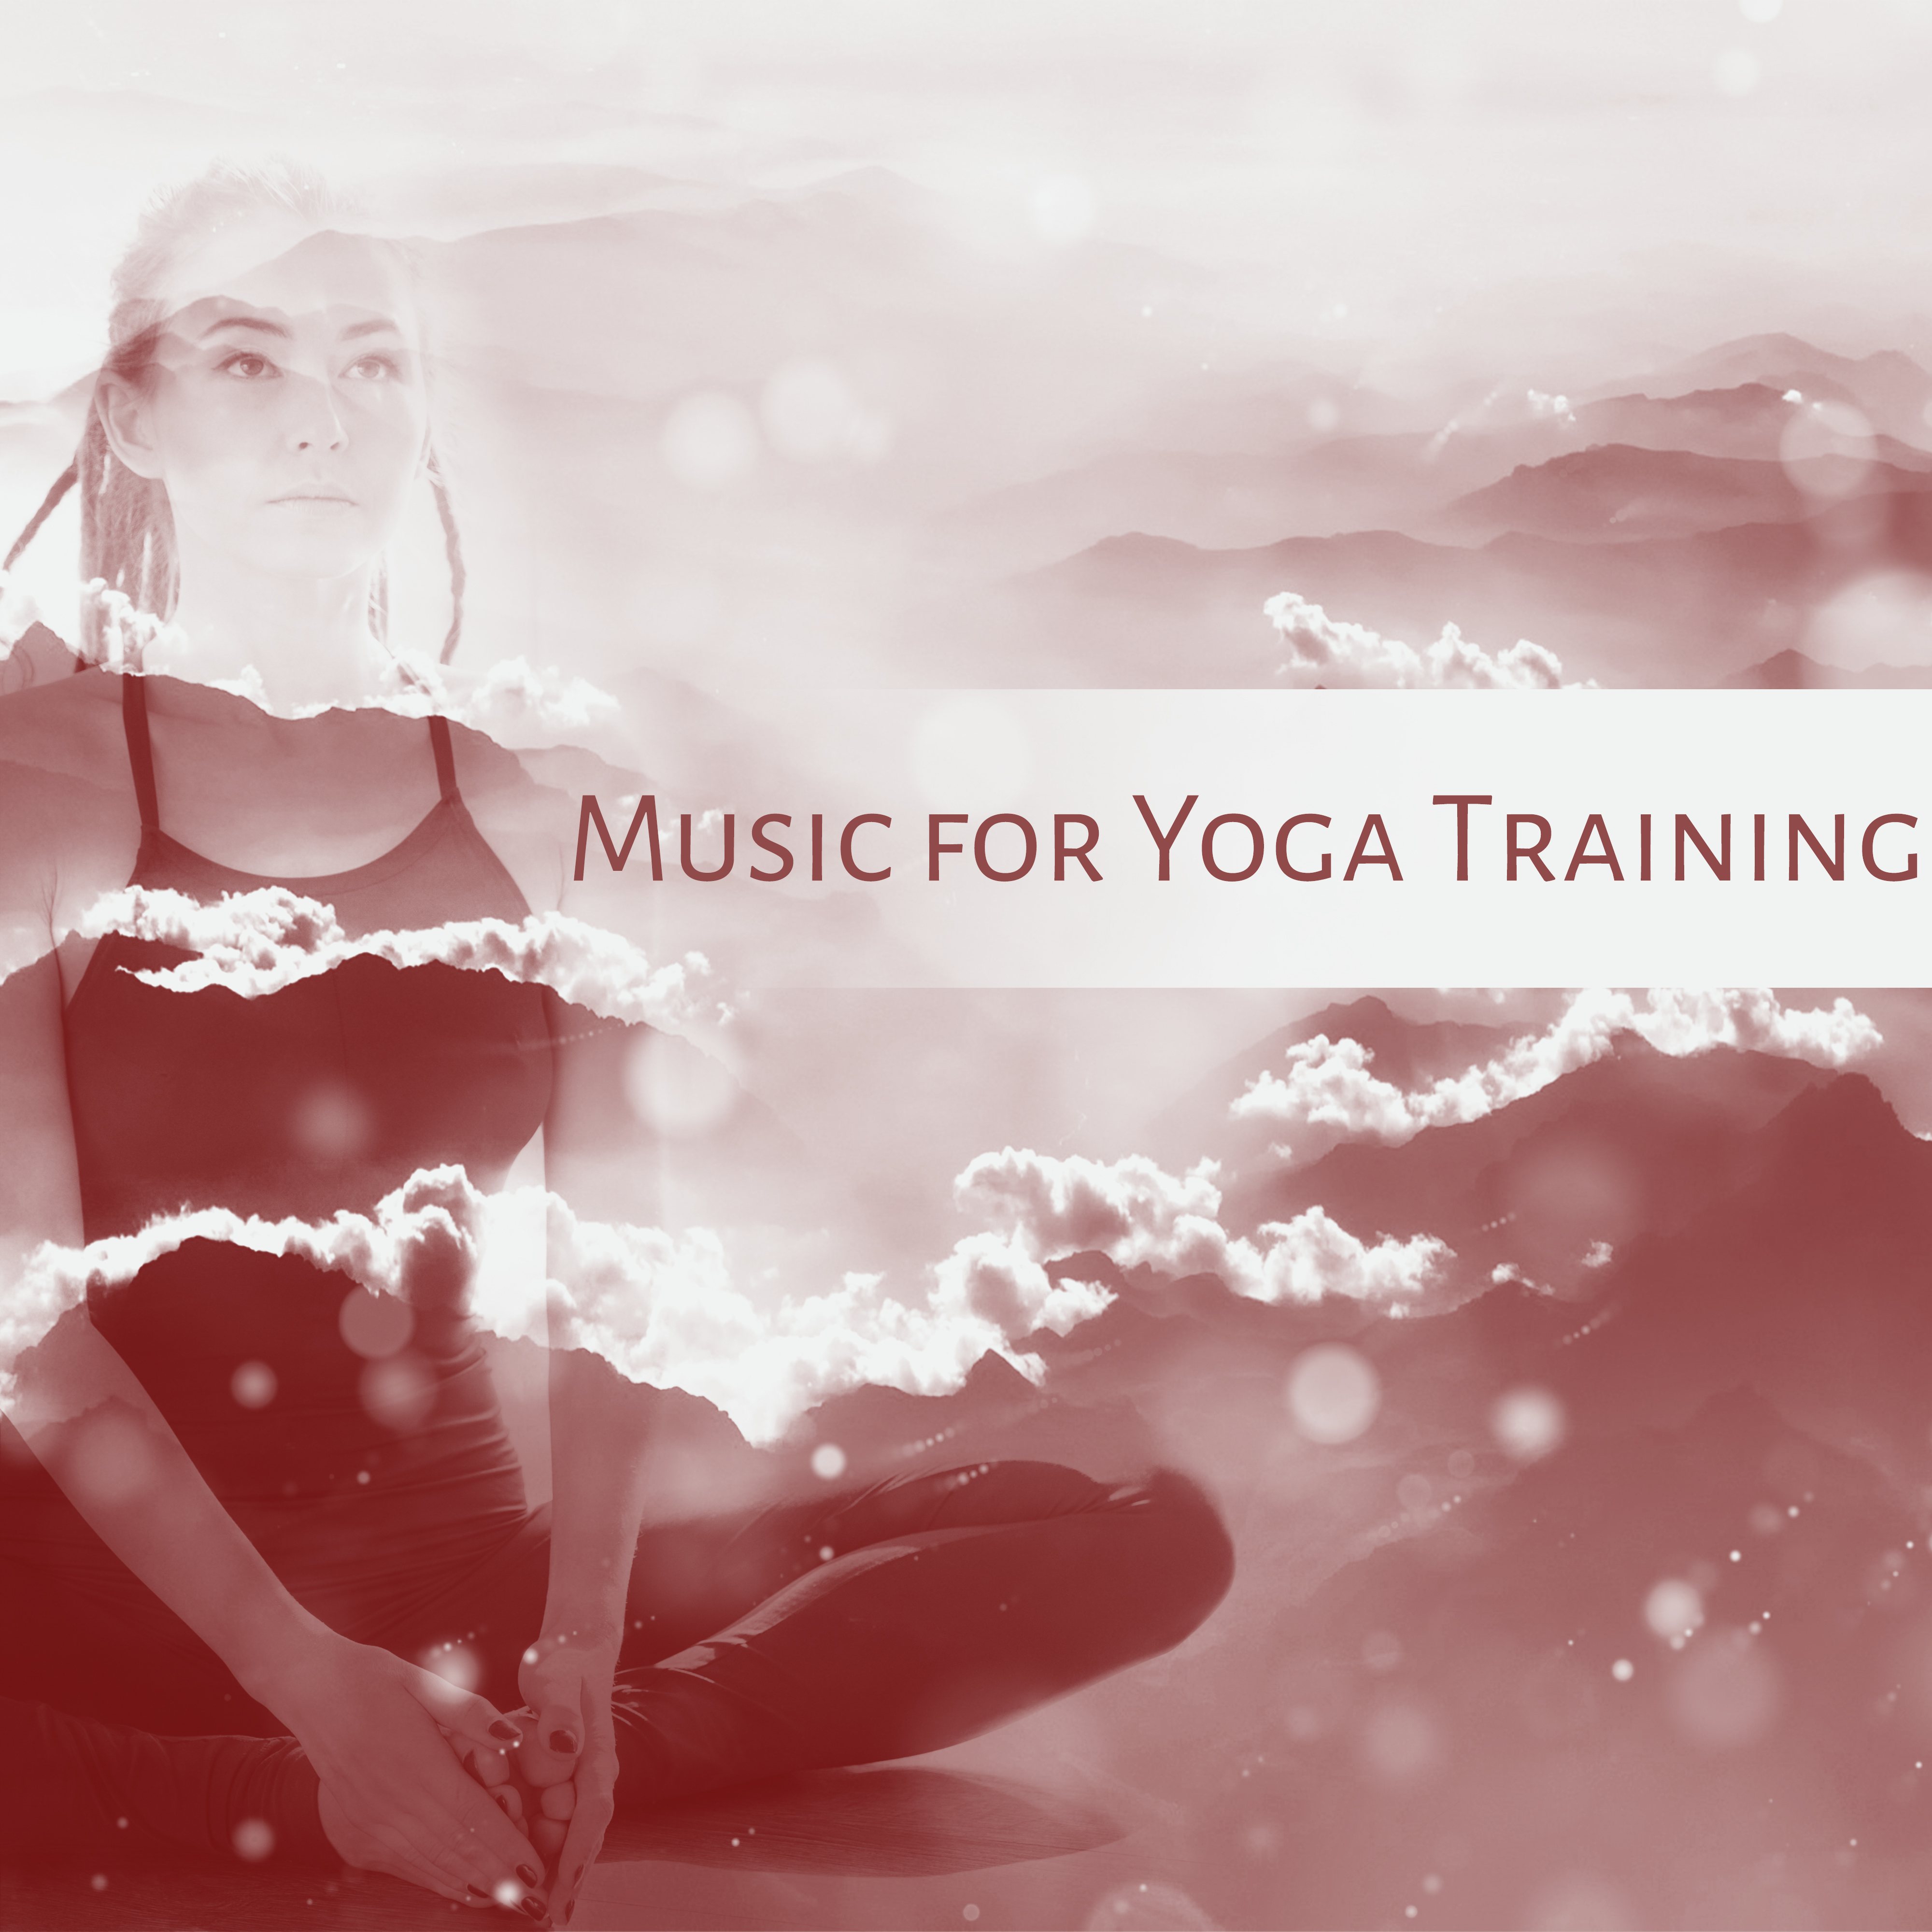 Music for Yoga Training  Relaxing Sounds, Yoga Meditation, Spiritual Sounds, Mind Peace